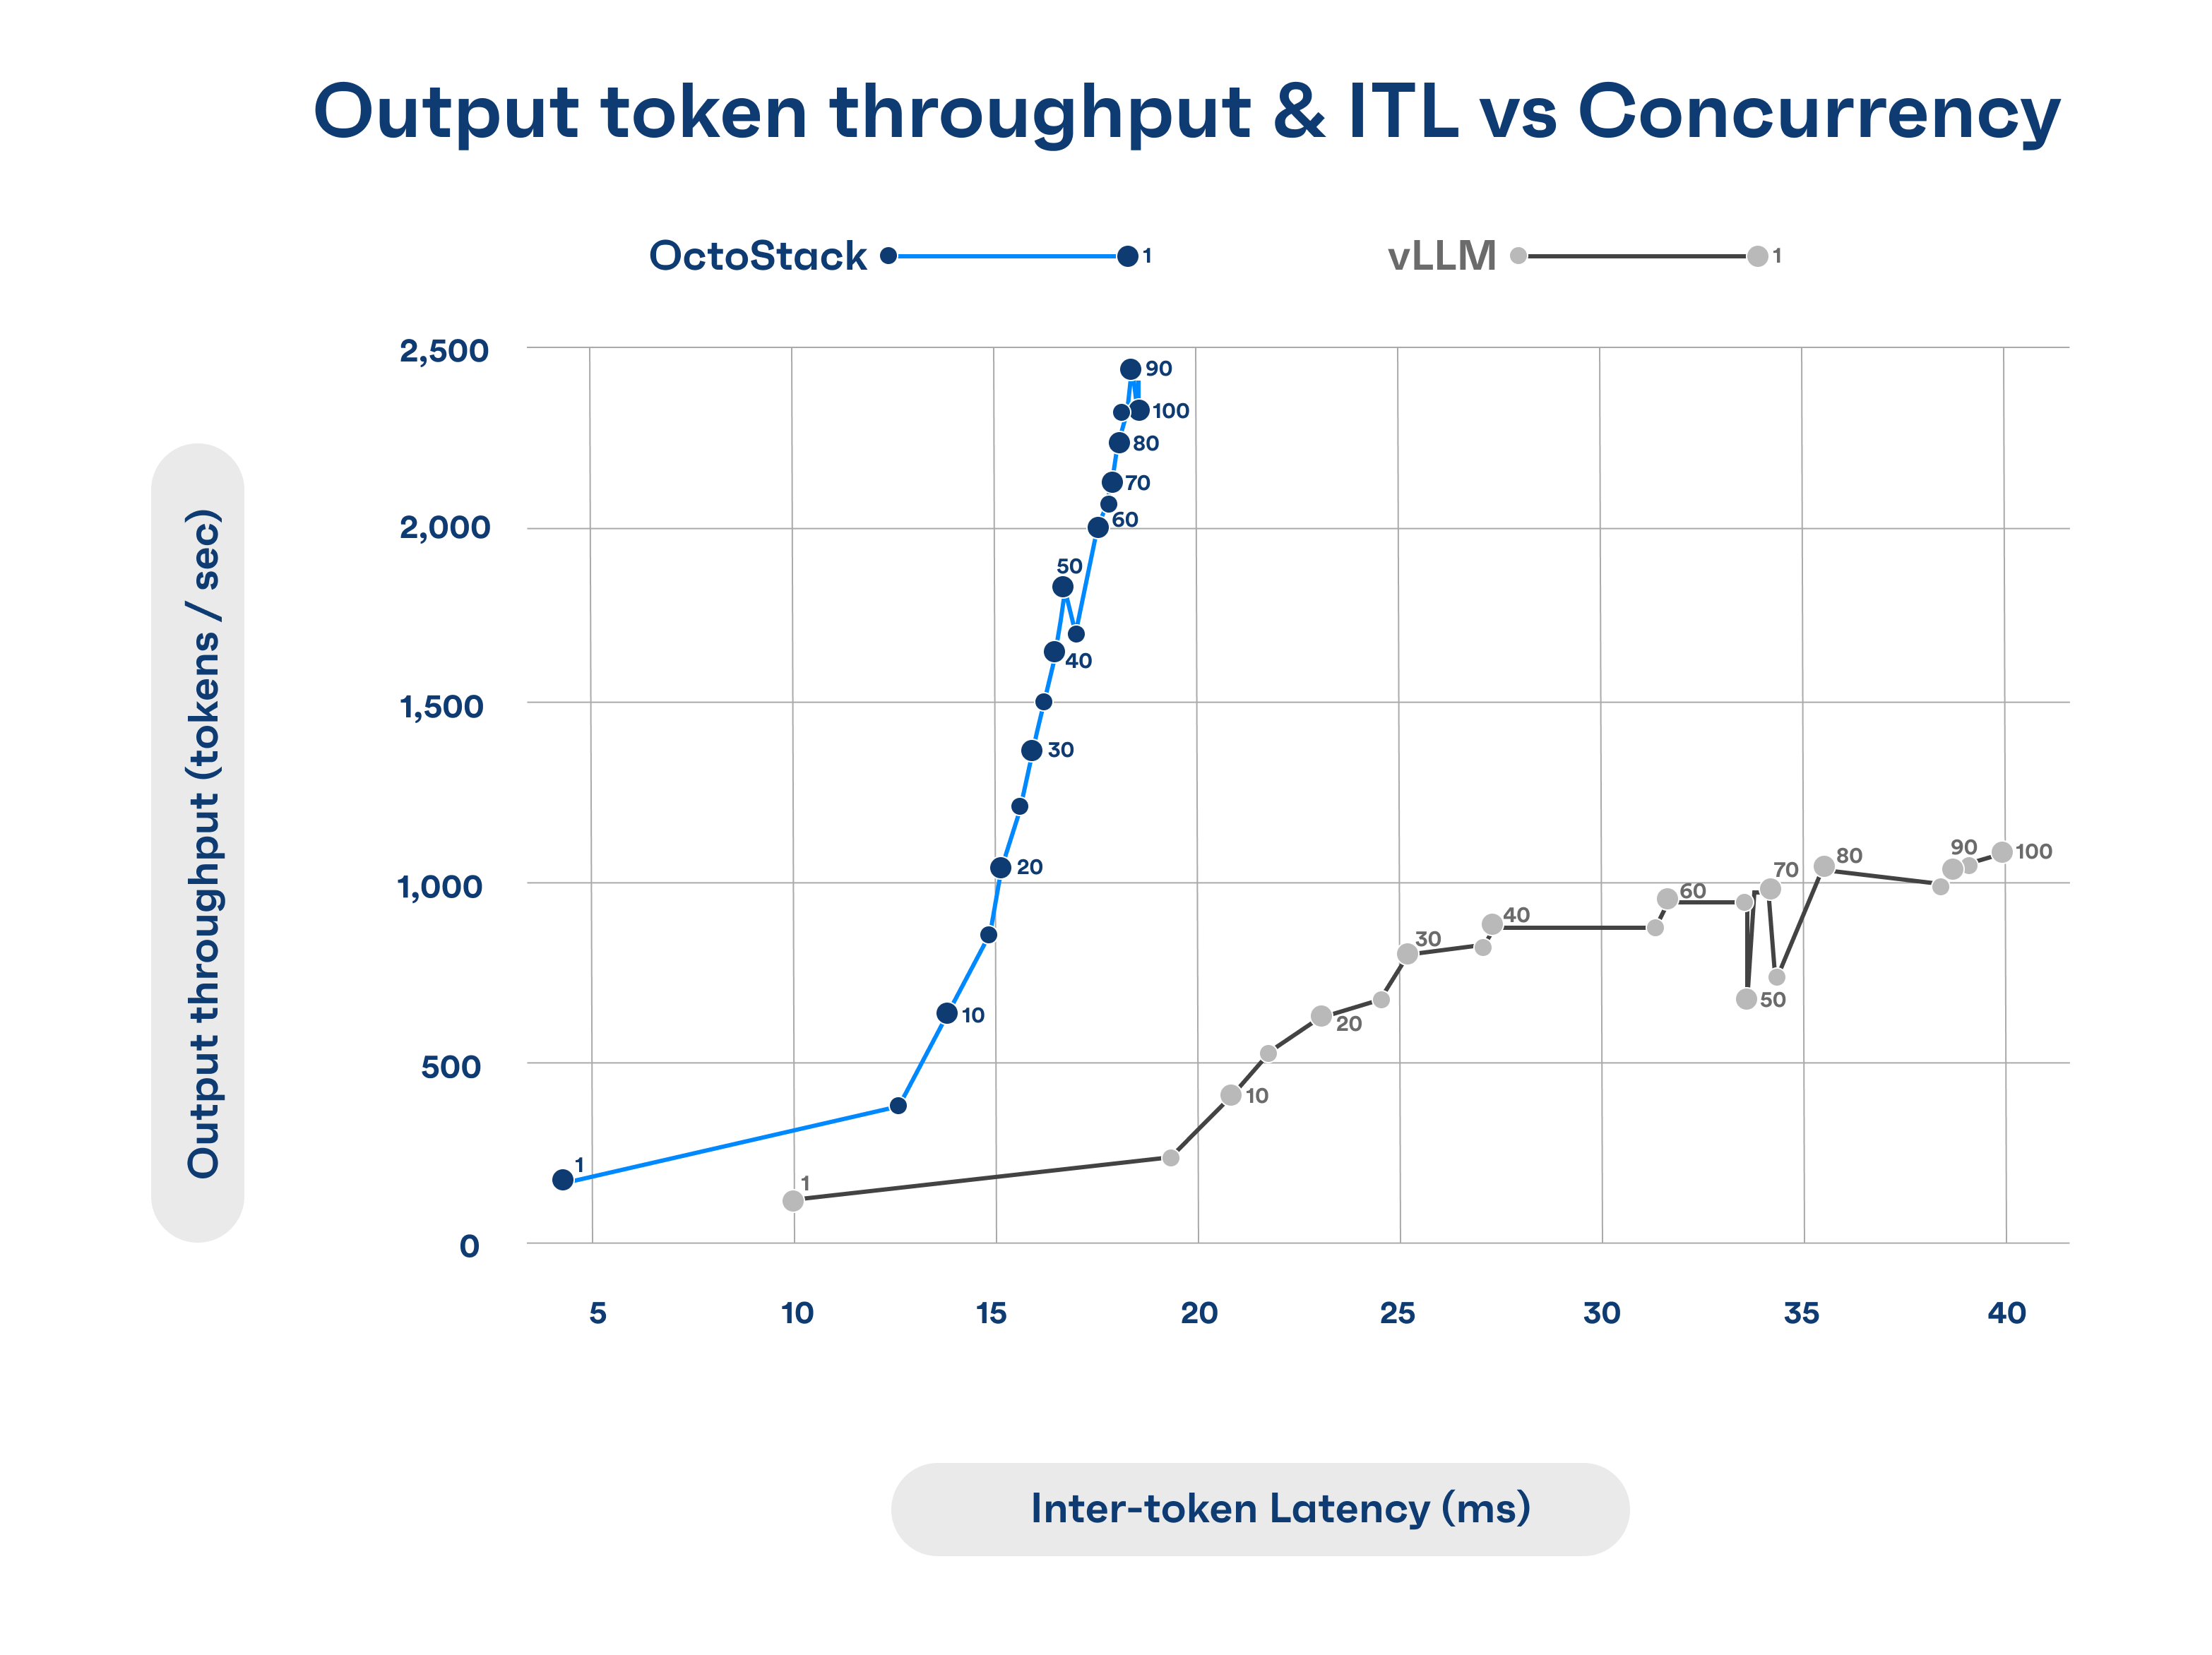 Line chart of OctoStack vs vLLM on Output token throughput and ITL vs Concurrency, showing OctoStack outperforming vLLM || '